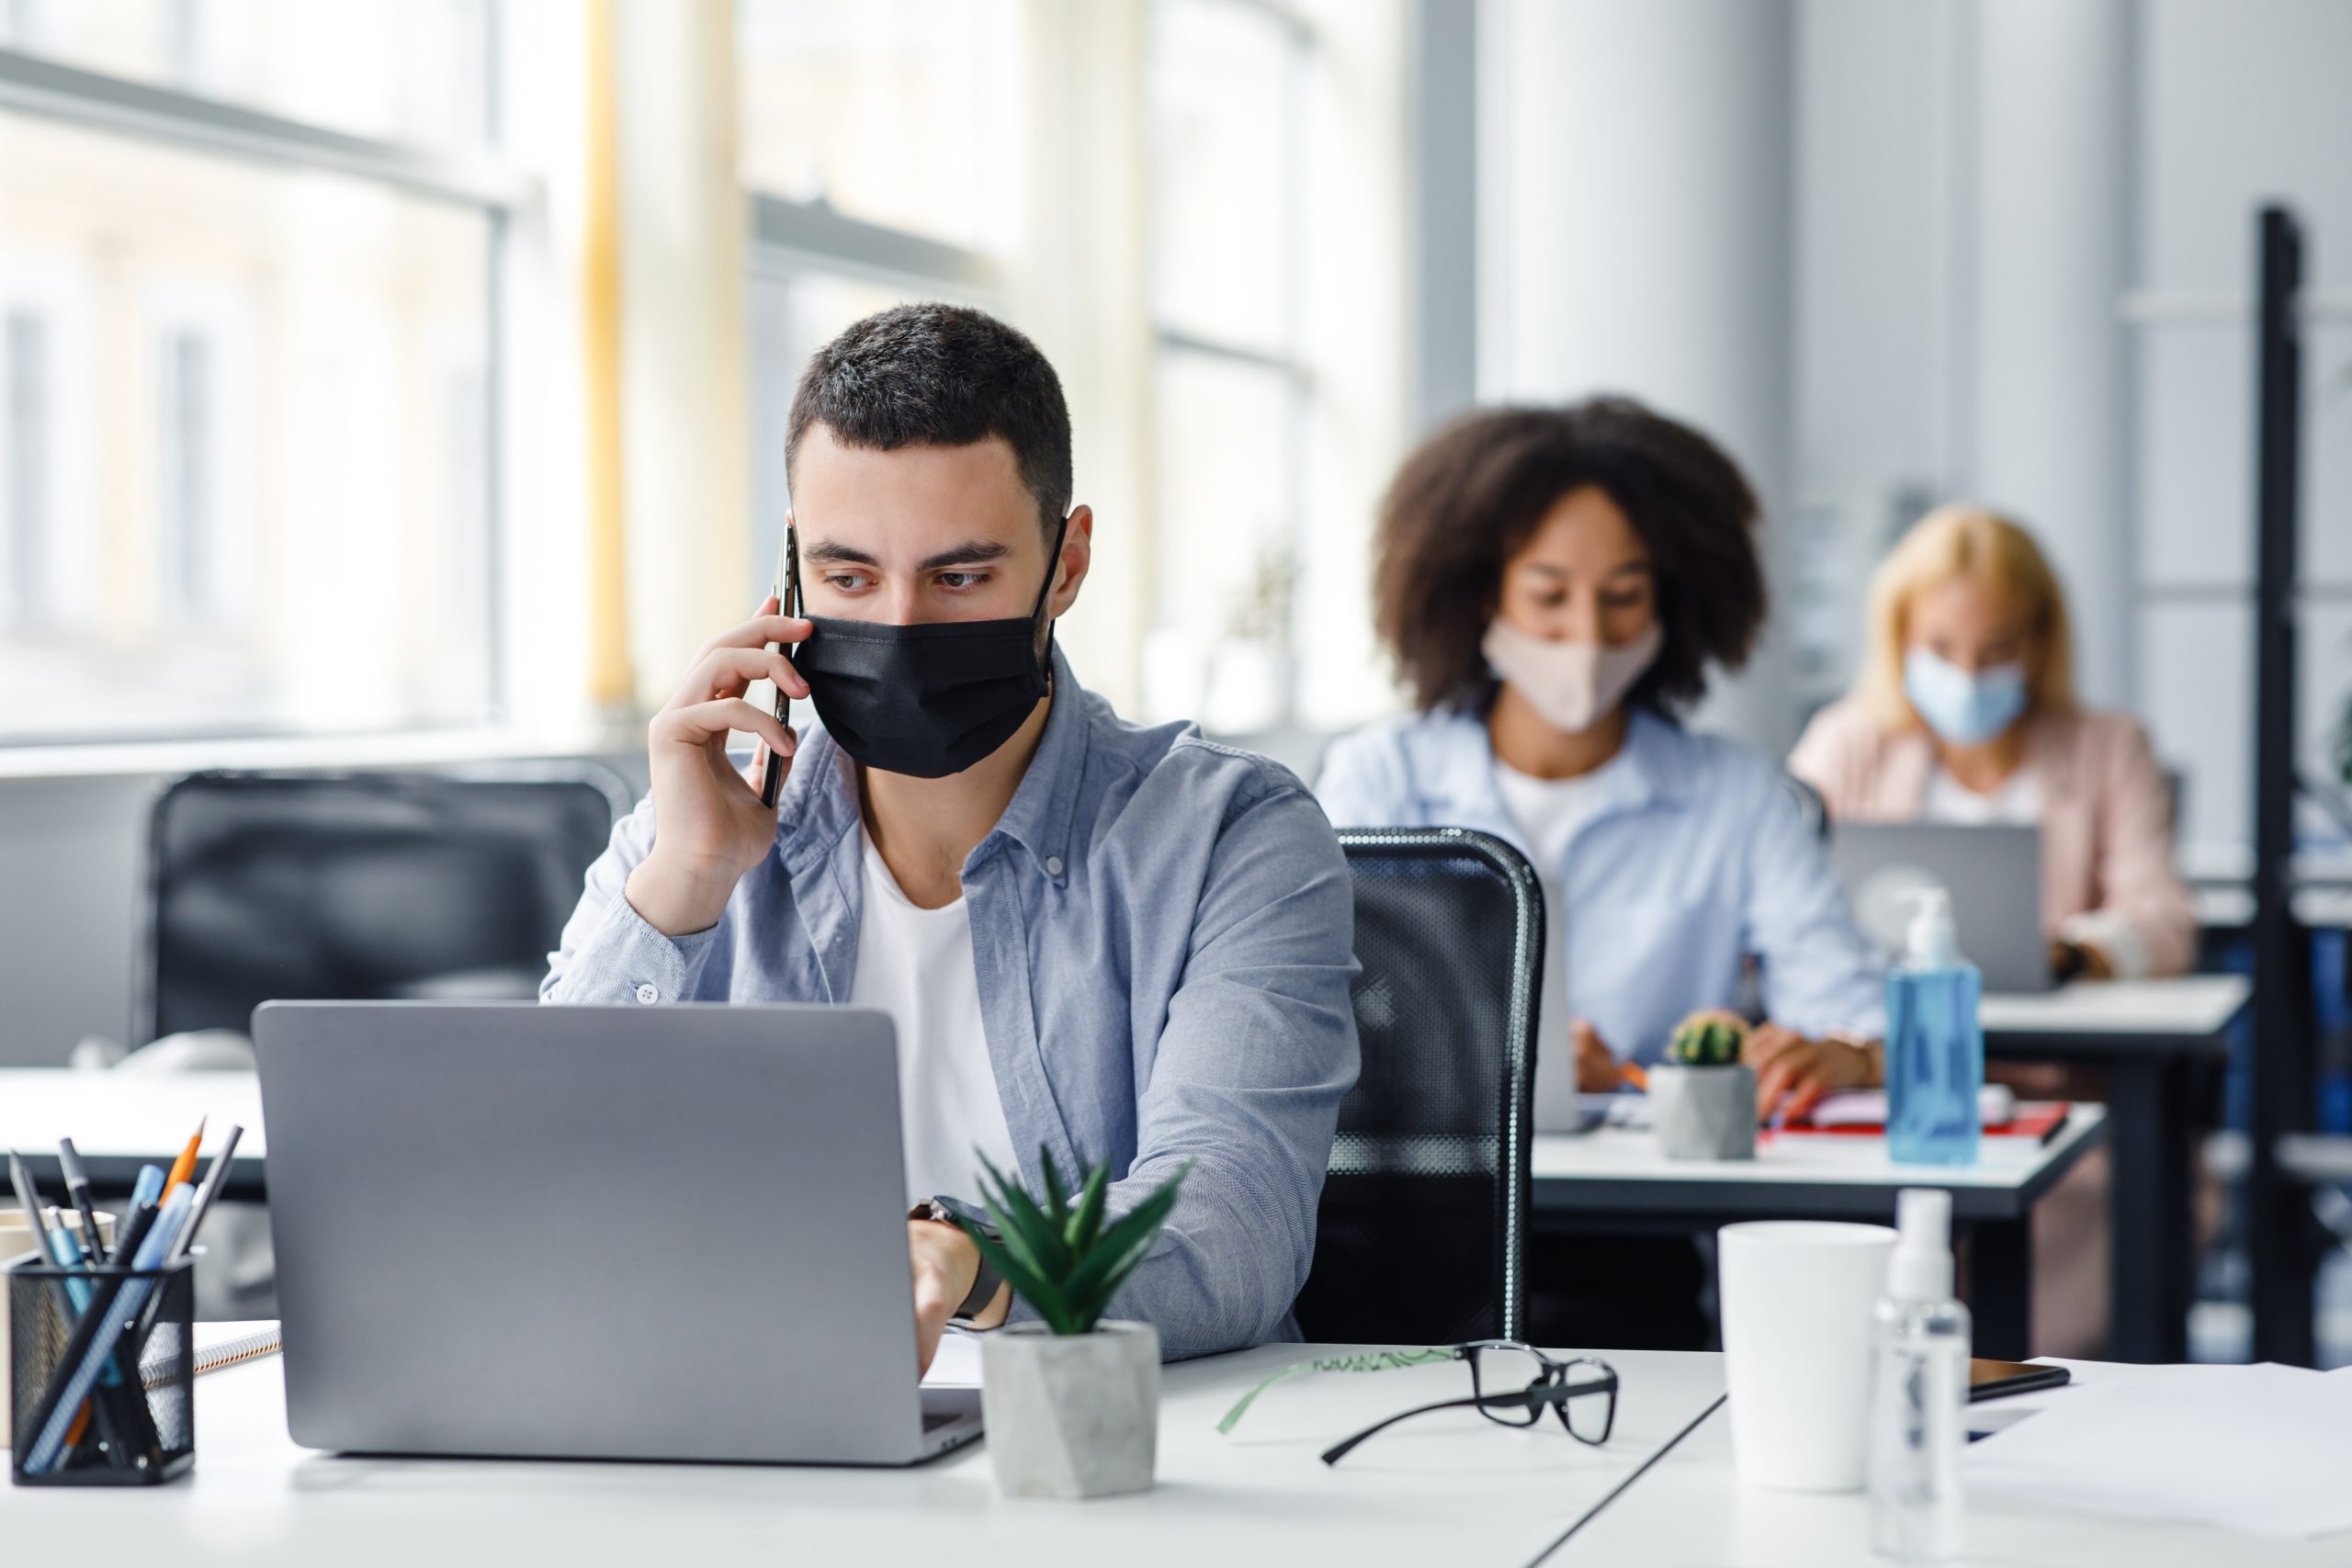 Customer consultation by phone remotely at returning to work after quarantine. Millennial man in protective mask with smartphone looks at laptop at workplace